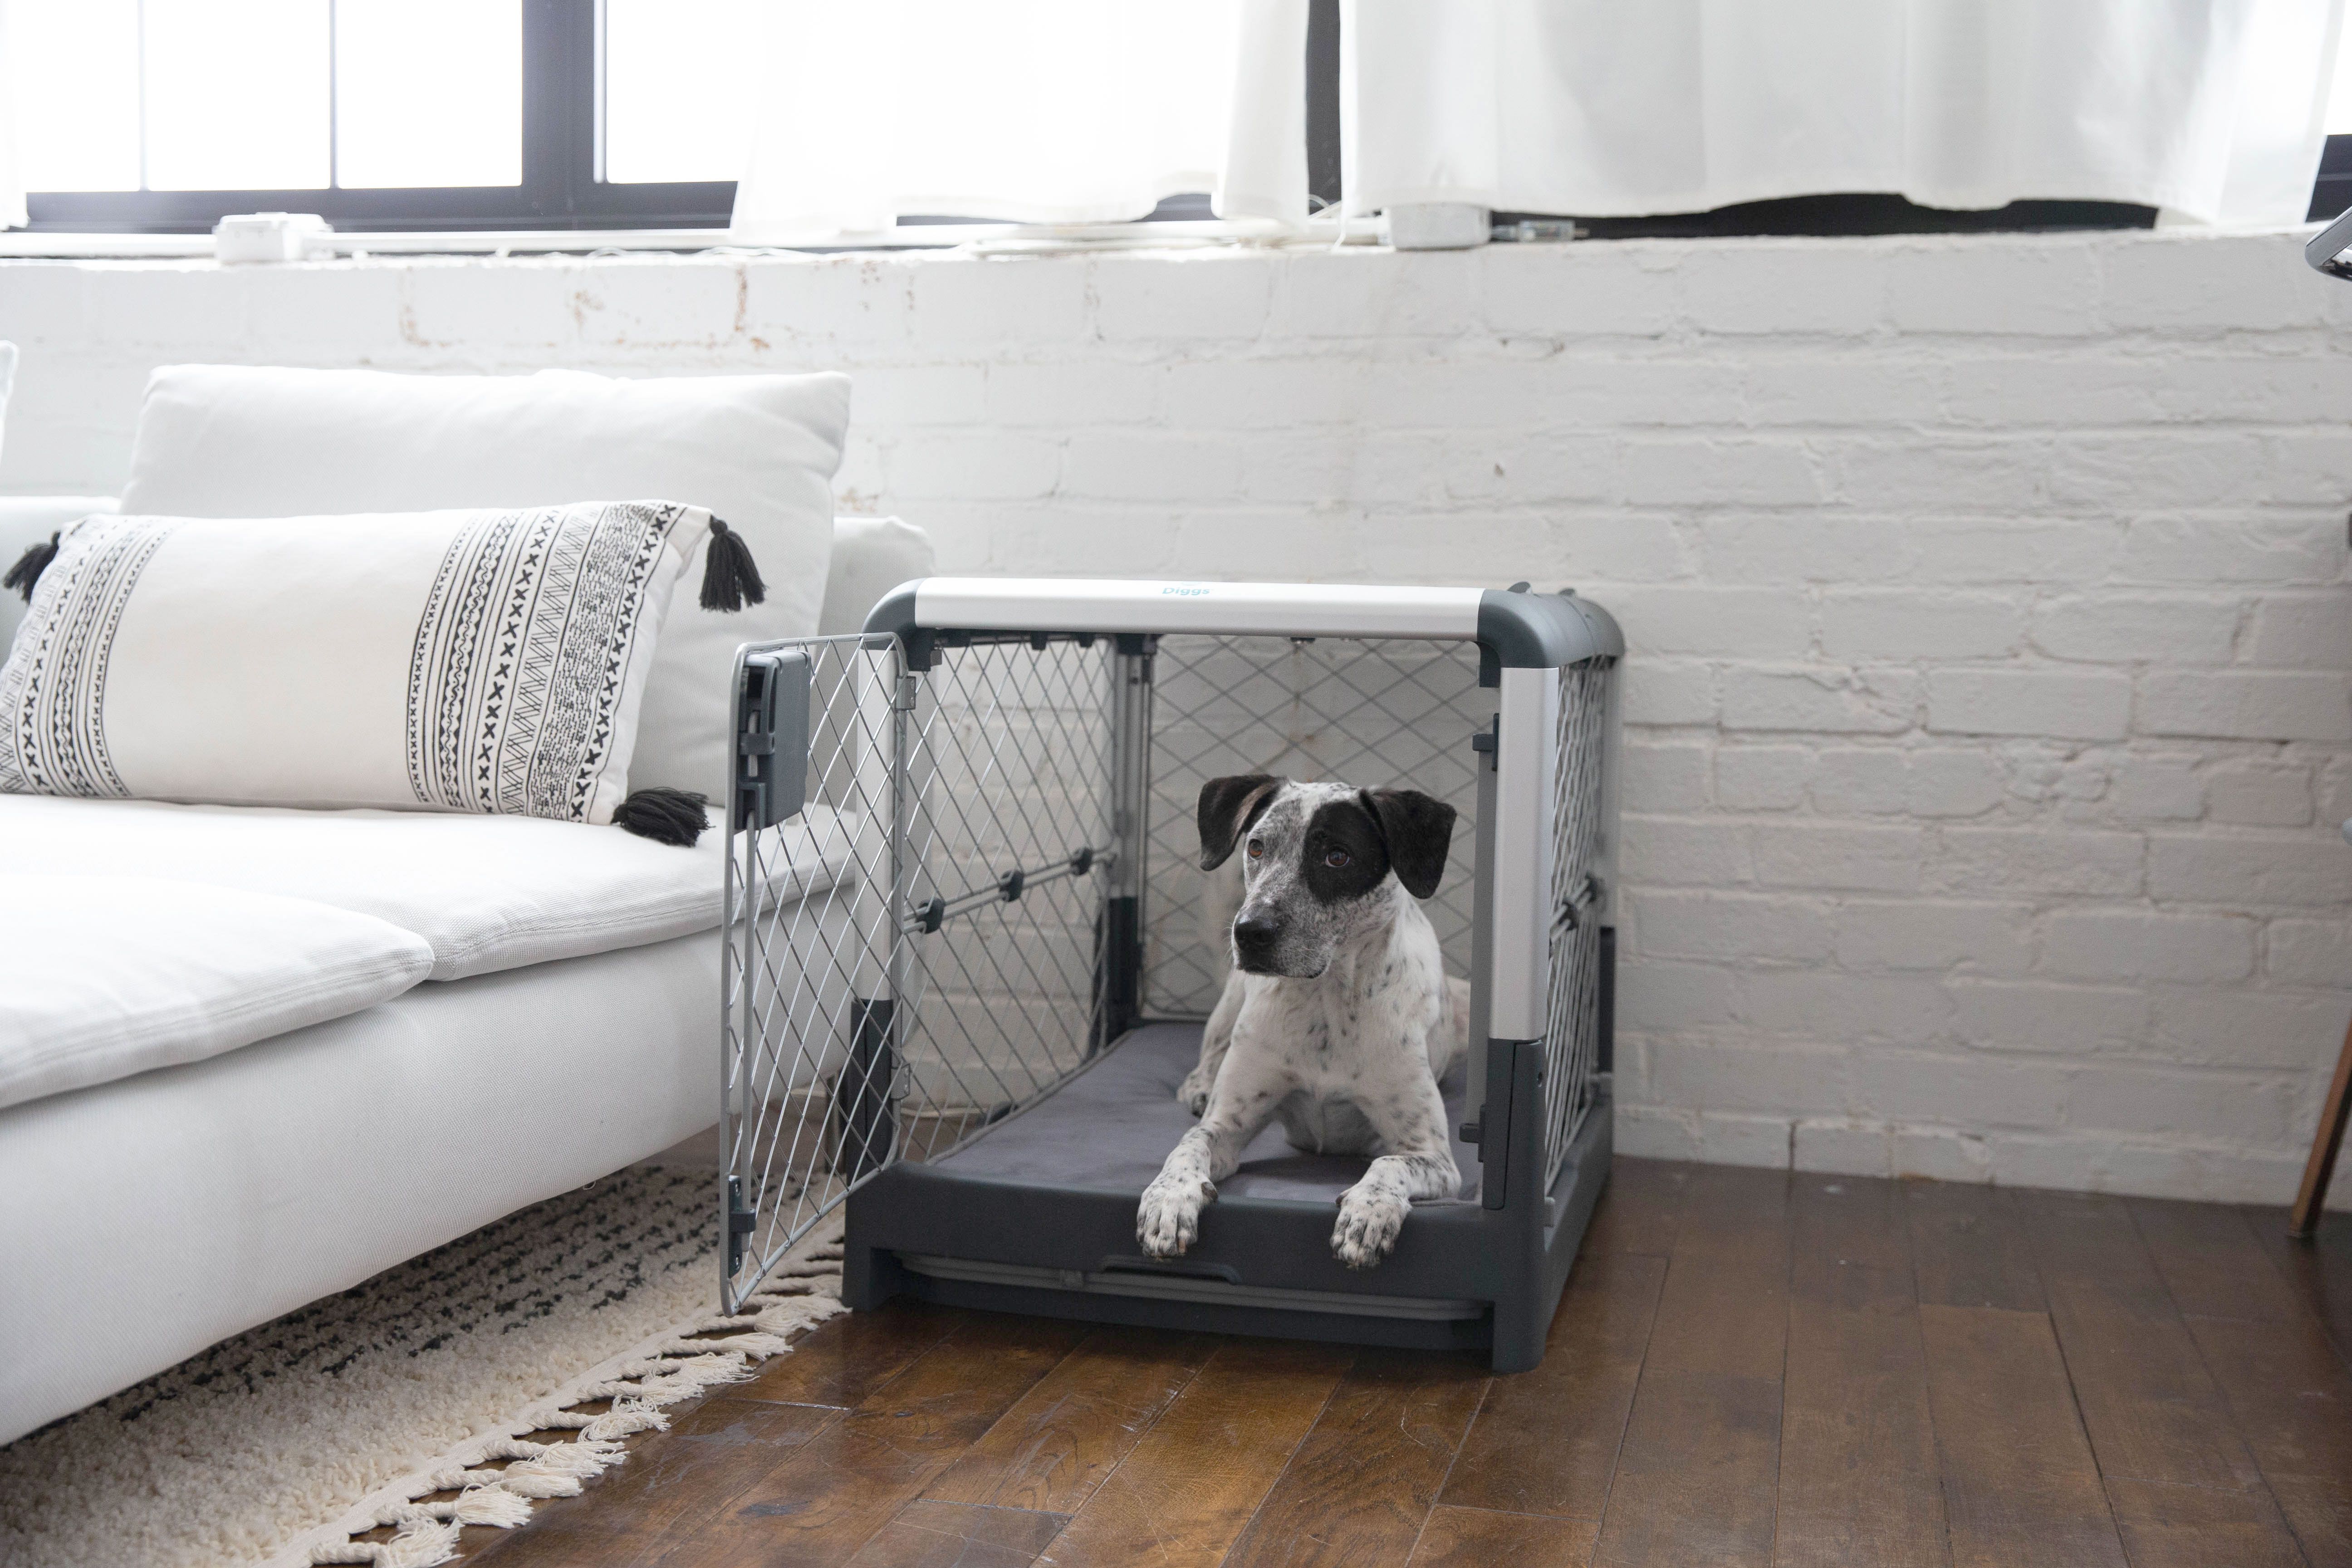 Activities For Dogs On Crate Rest - Professional Dog Training Tips 